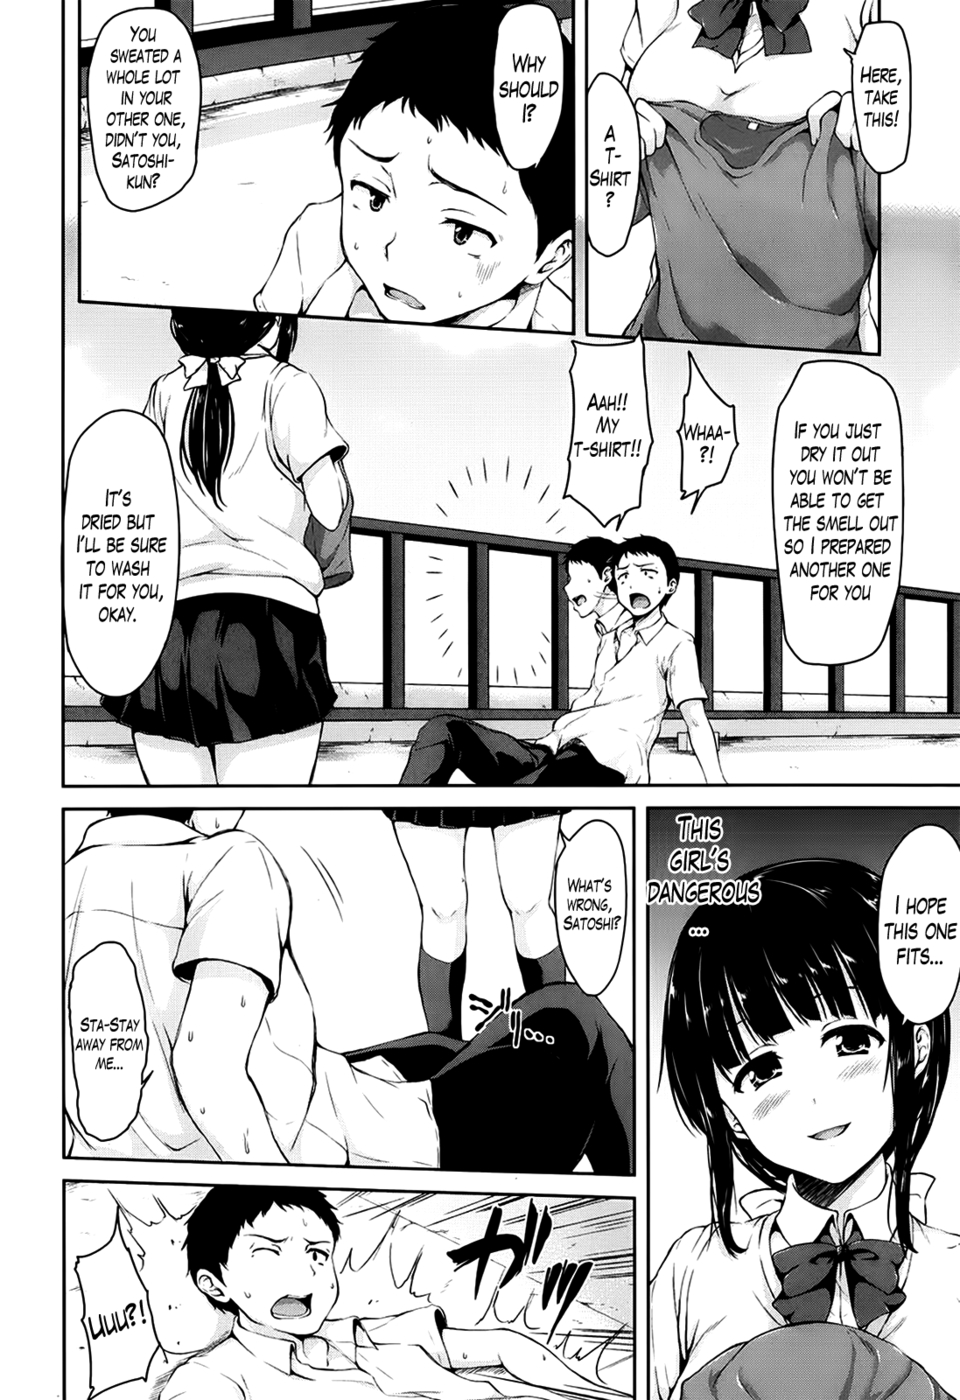 Regrettable Heroines-Chapter 1-Hentai Manga Hentai Comic - Page: 16 -  Online porn video at mobile